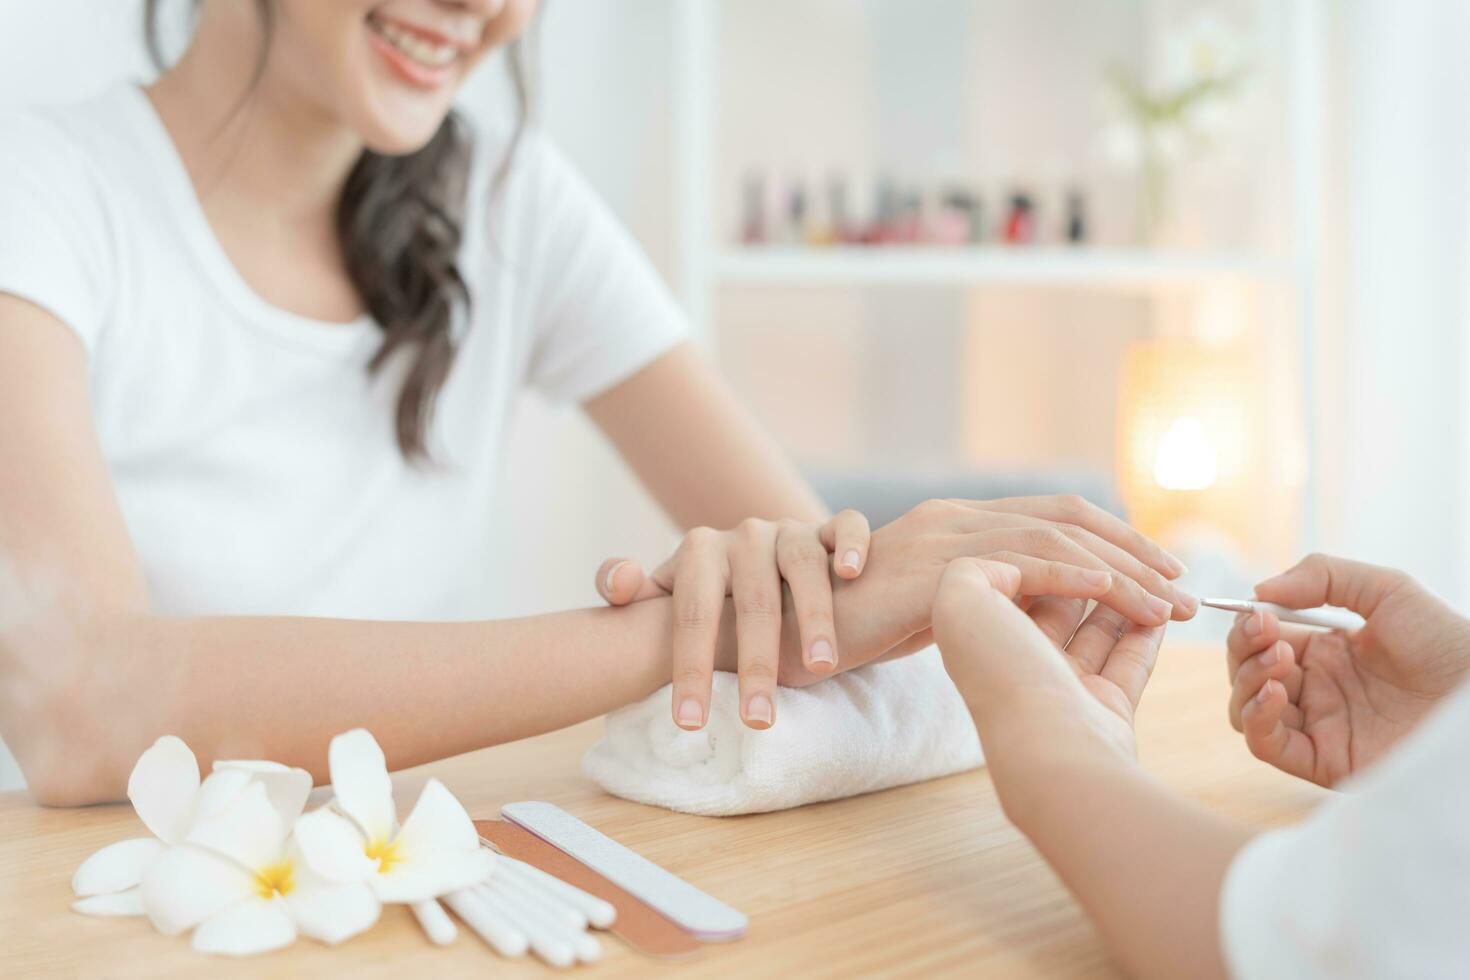 Woman receive care service by professional Beautician Manicure at spa centre. Nail beauty salon use nail file for Glazing treatment. manicurist make nail customer to beautiful. body care spa treatment photo